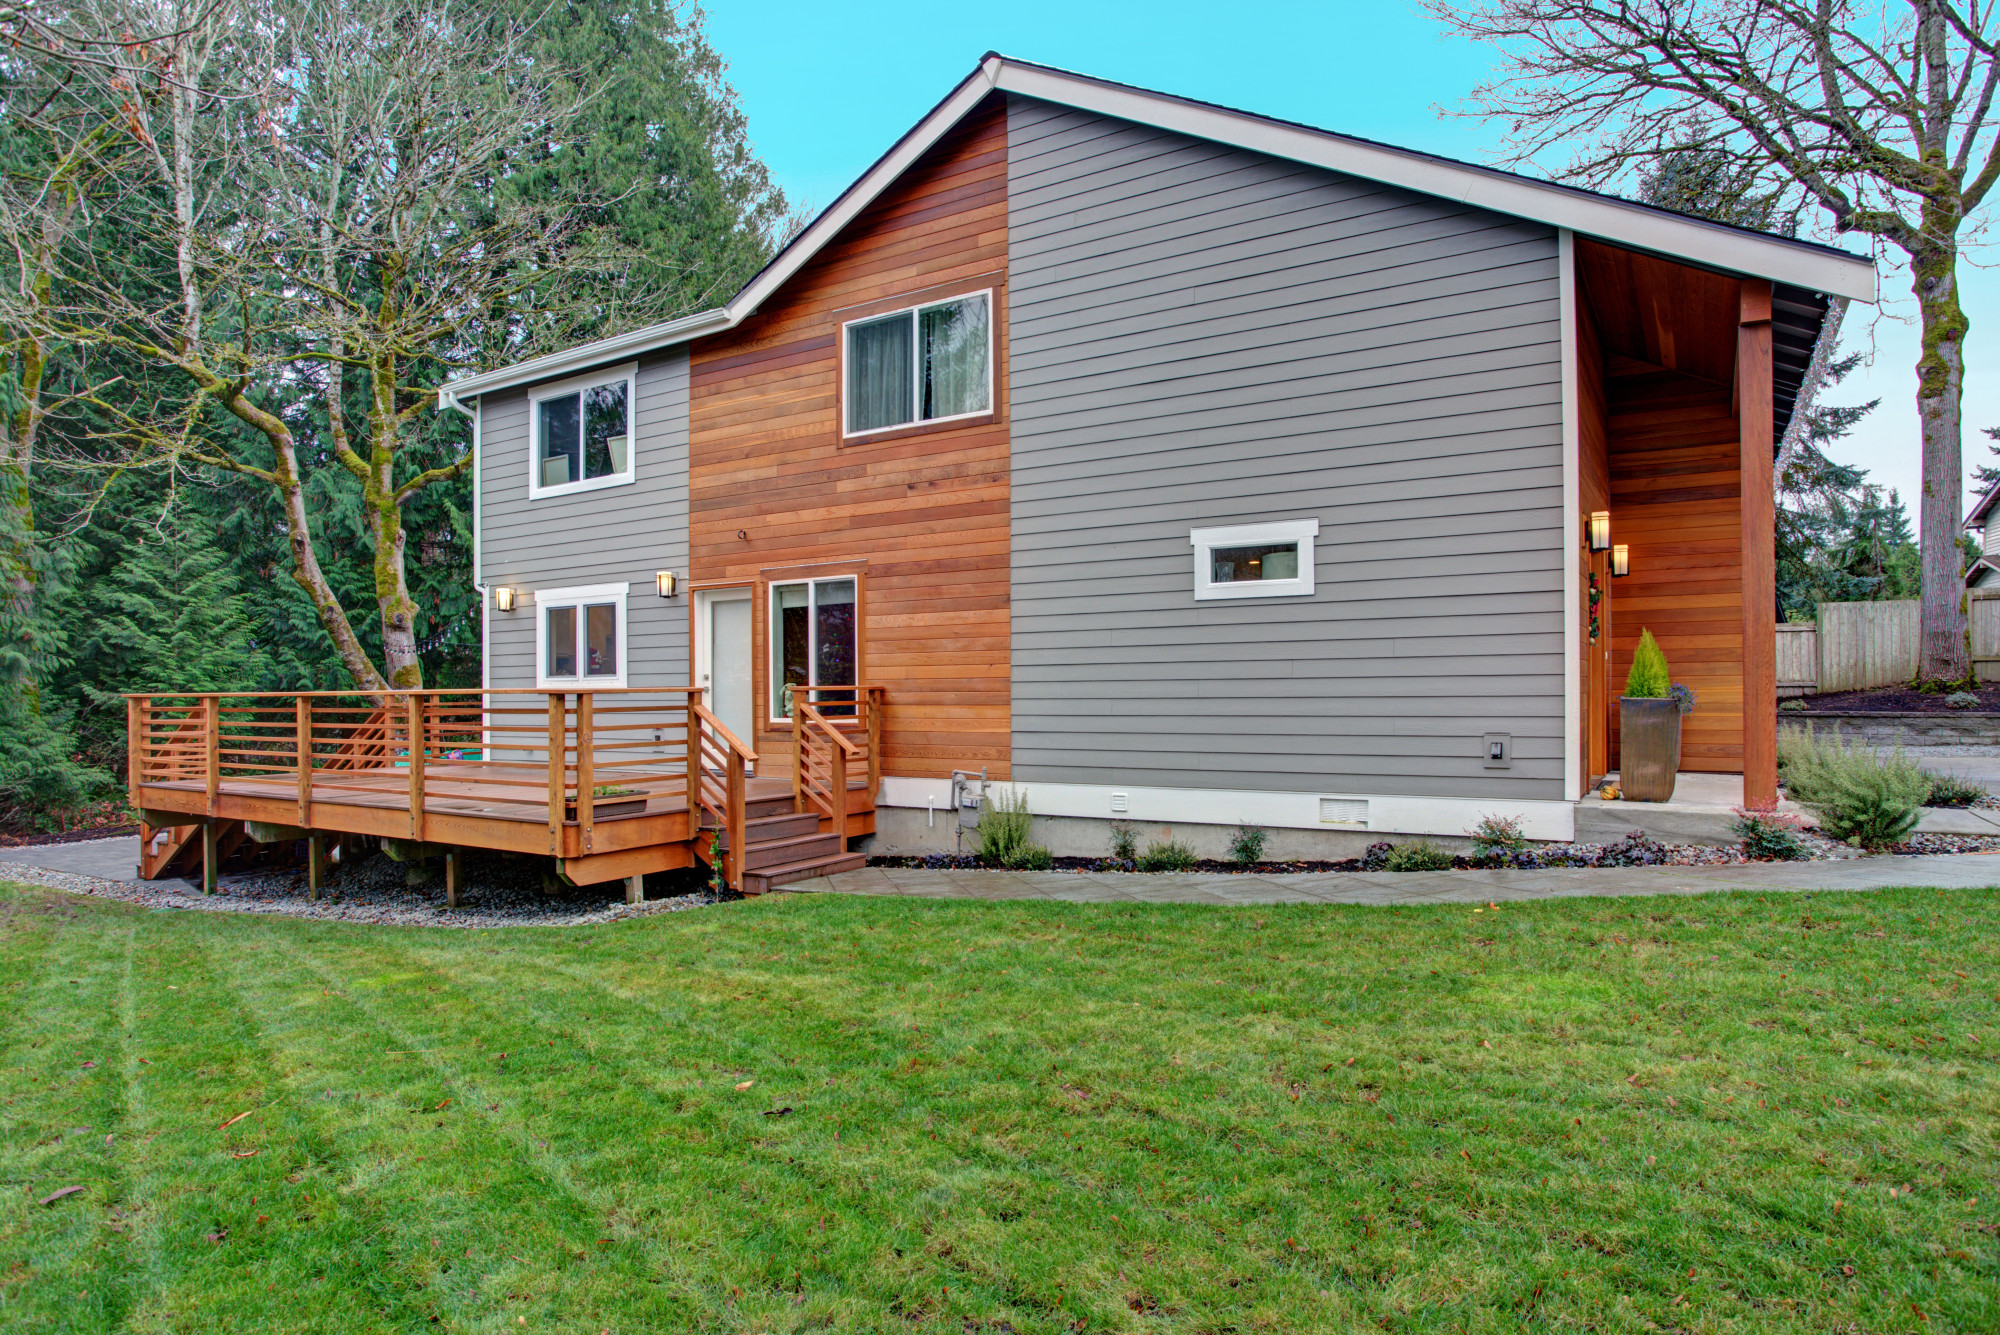 How to Care for Your Home’s Wood Siding: 7 Essential Maintenance Tips